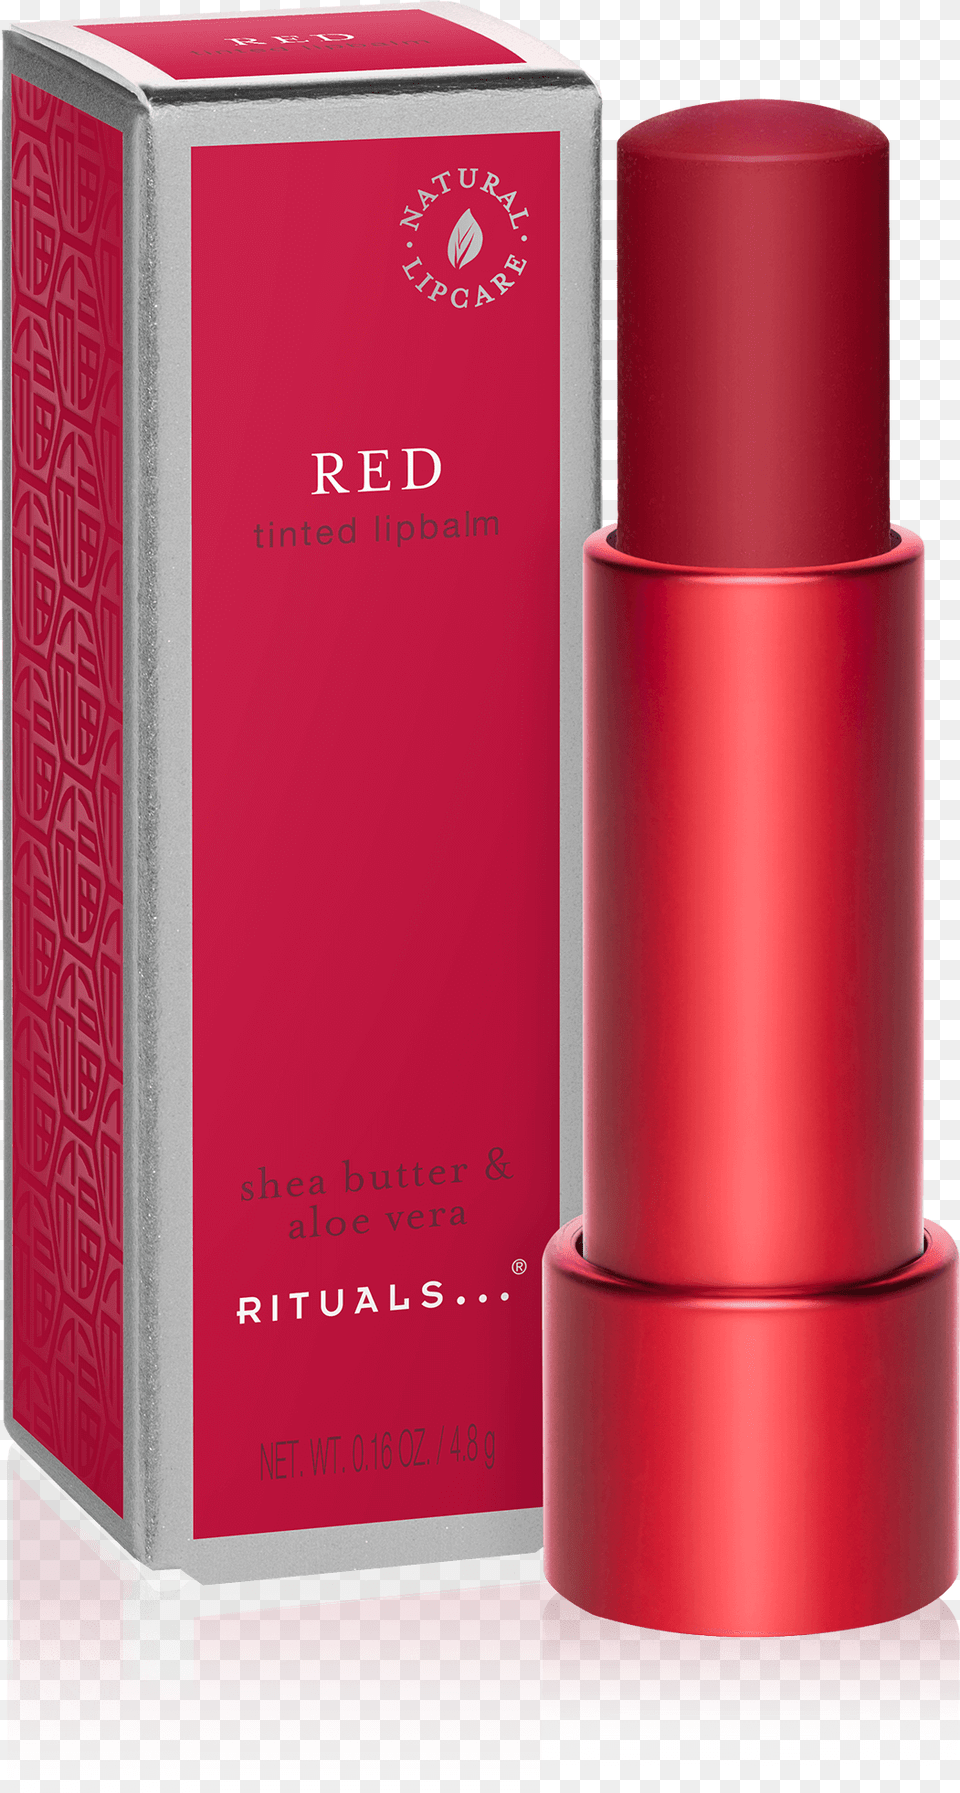 Fortune Balms Red Rituals Fortune Balm Pink, Cosmetics, Lipstick, Bottle, Dynamite Png Image